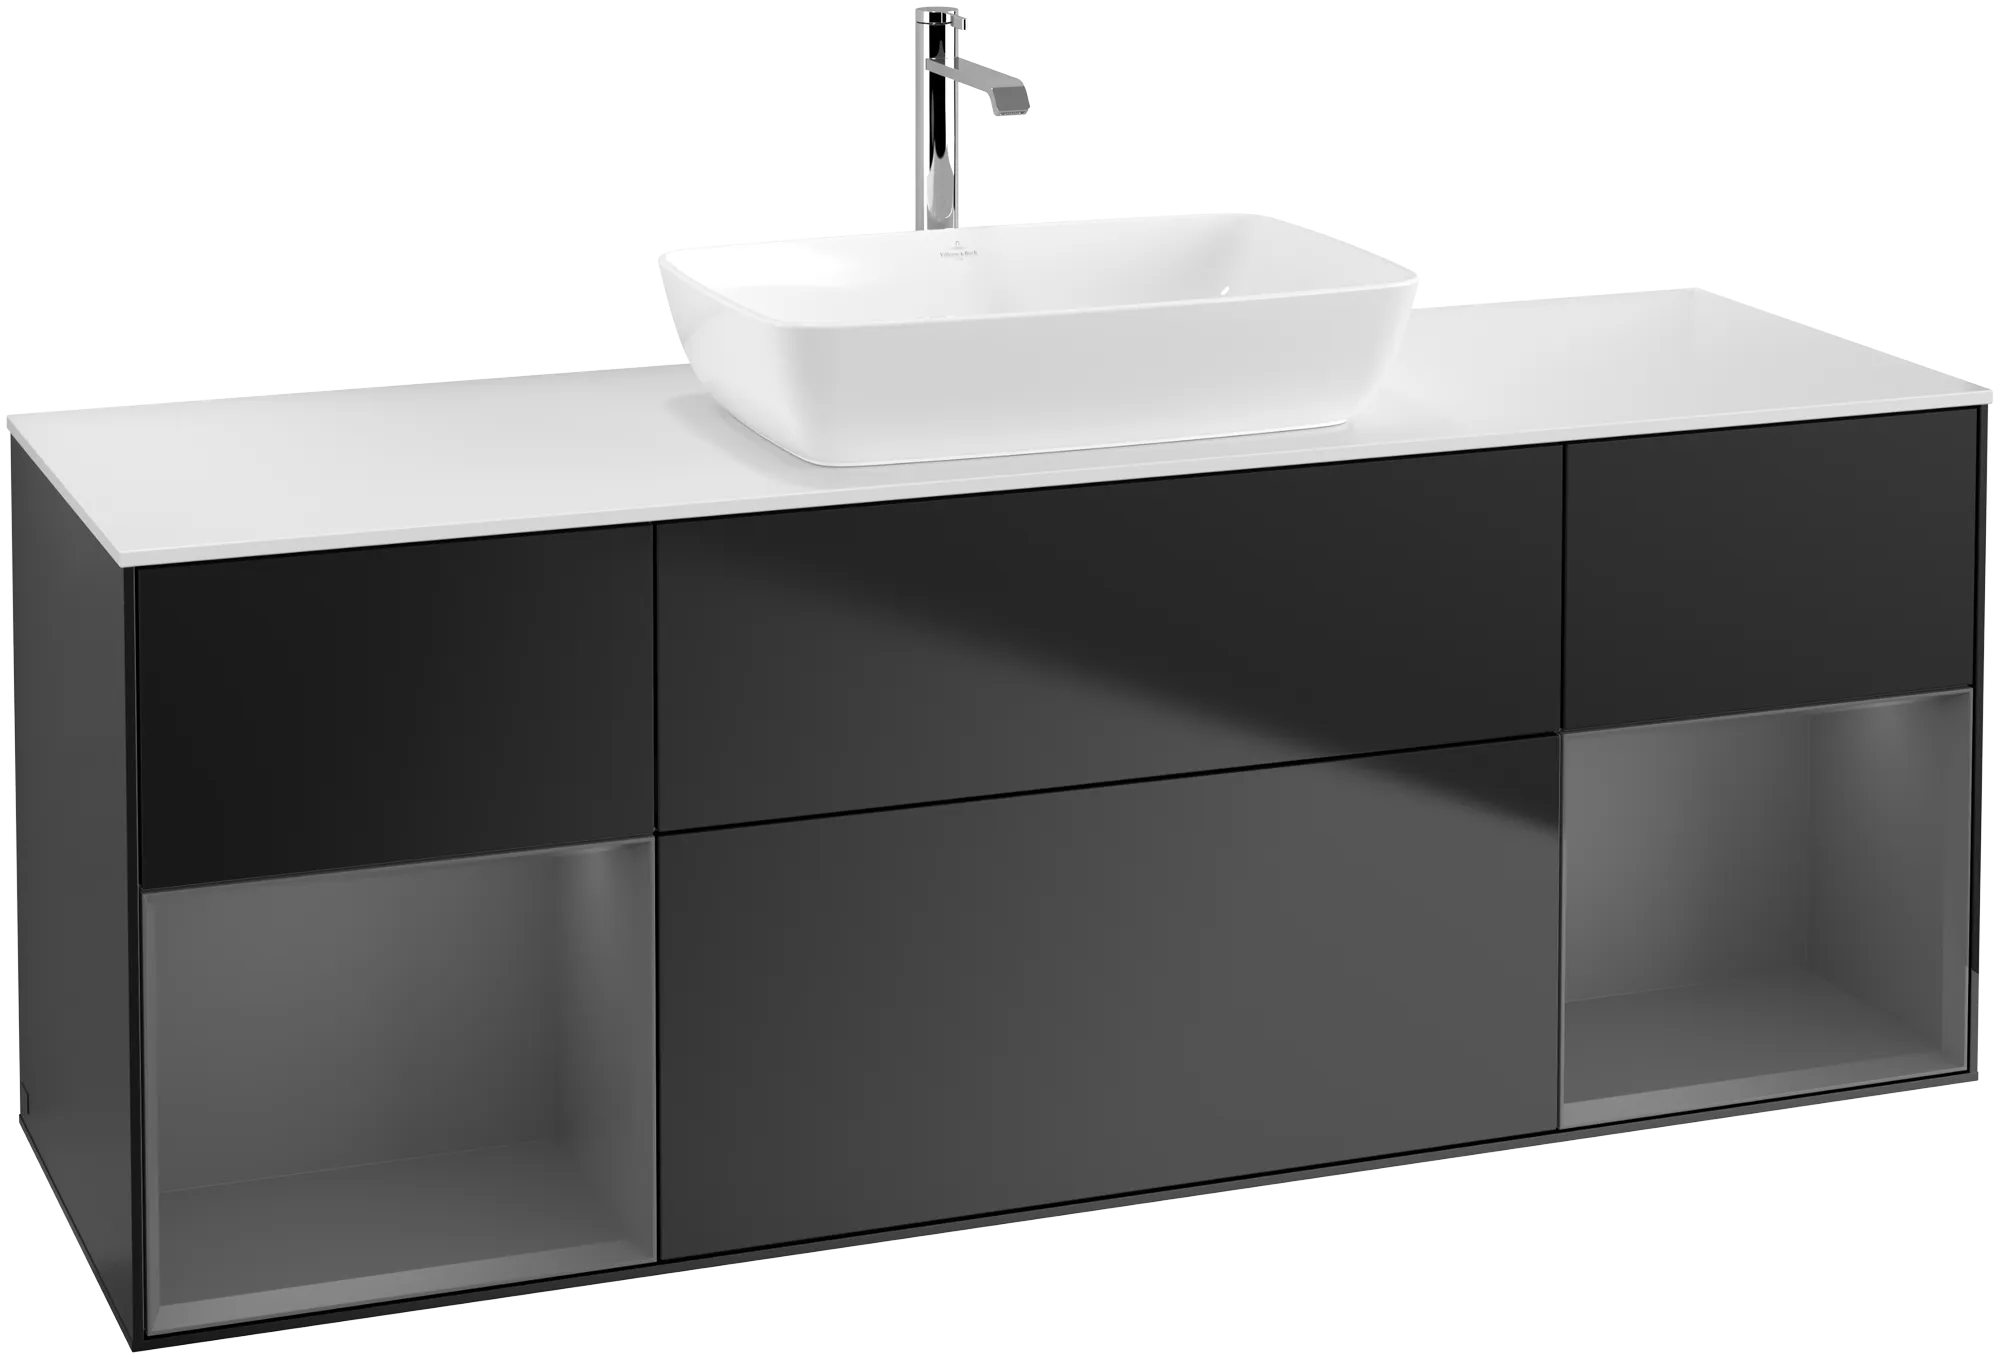 Picture of VILLEROY BOCH Finion Vanity unit, with lighting, 4 pull-out compartments, 1600 x 603 x 501 mm, Black Matt Lacquer / Anthracite Matt Lacquer / Glass White Matt #G861GKPD